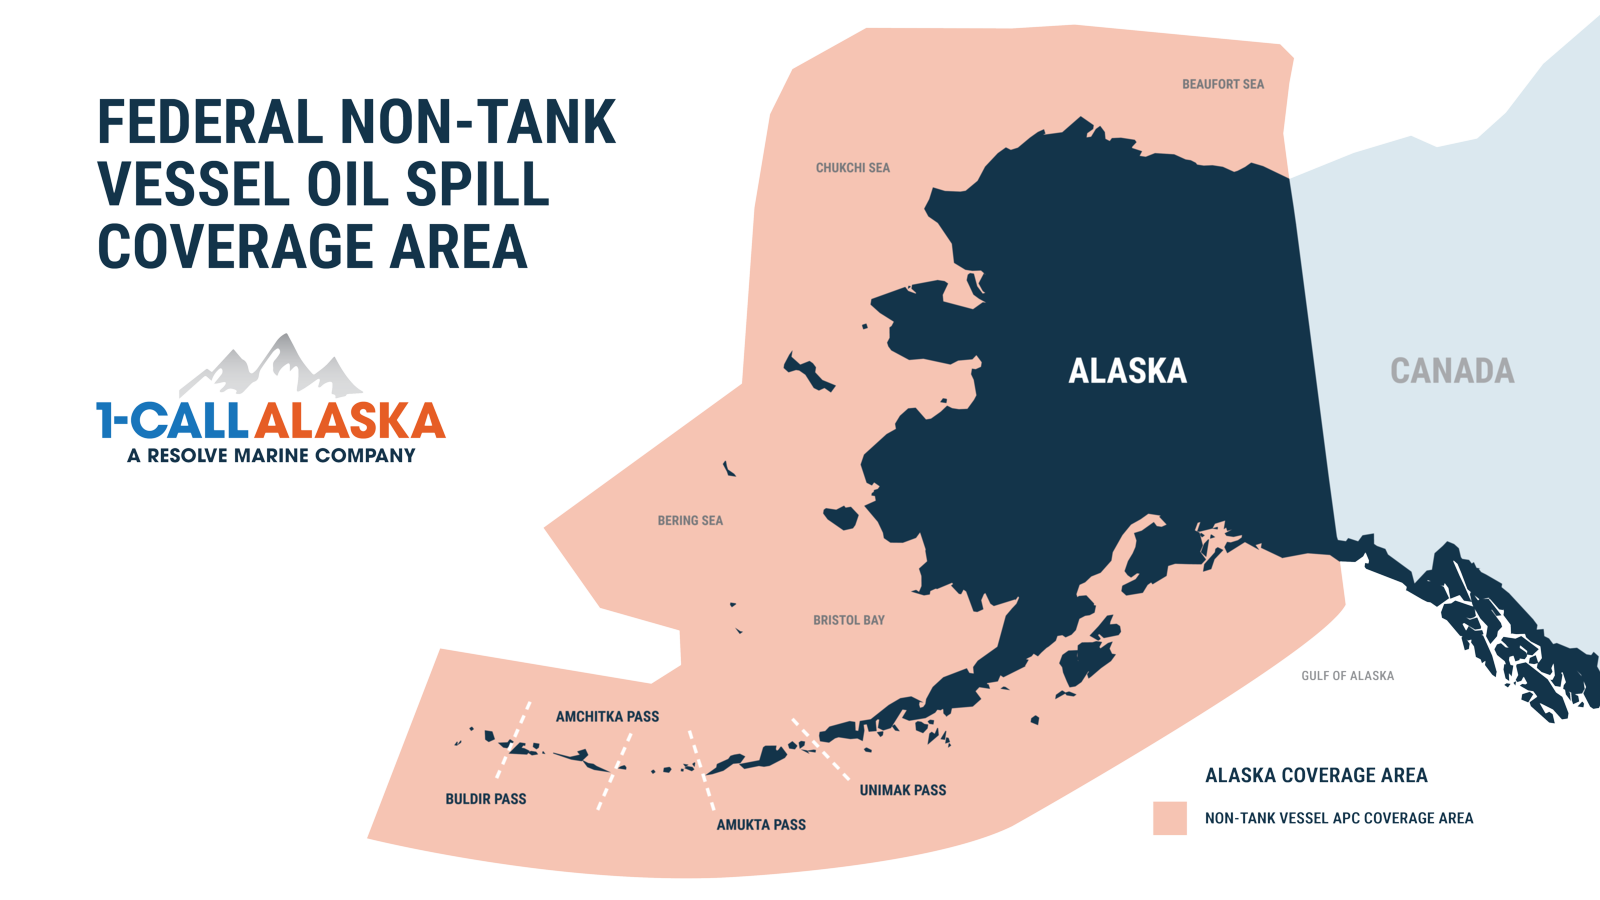 Map of Alaska showing the federal non-tank vessel oil spill coverage area